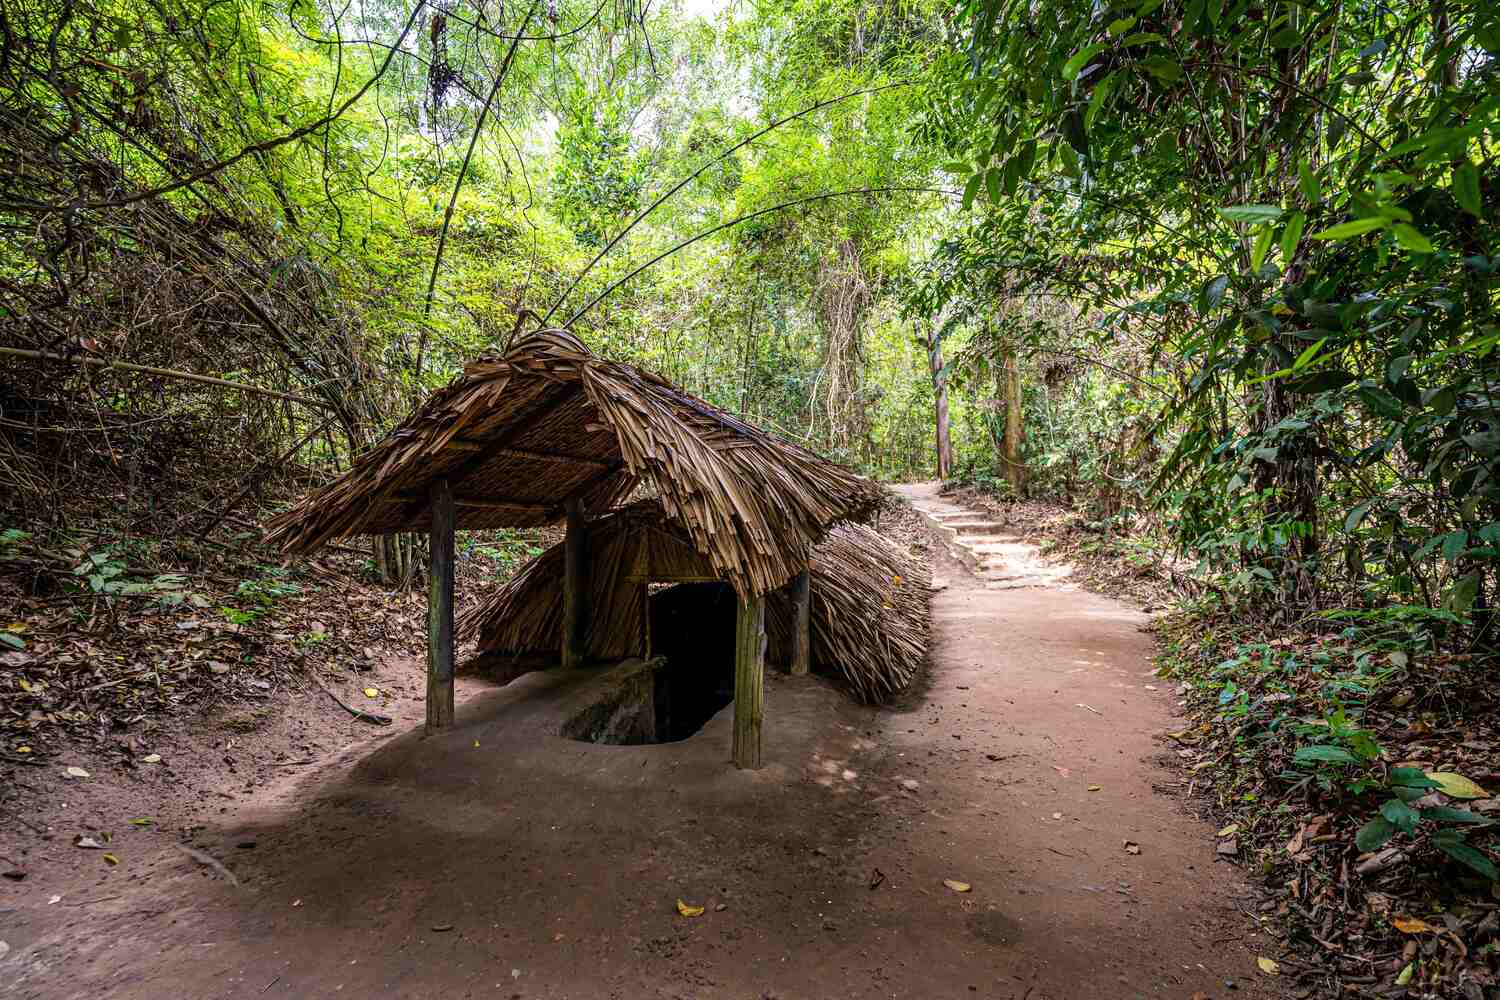 Rustic thatched hut along a jungle path in the Cu Chi tunnel complex area in Vietnam.